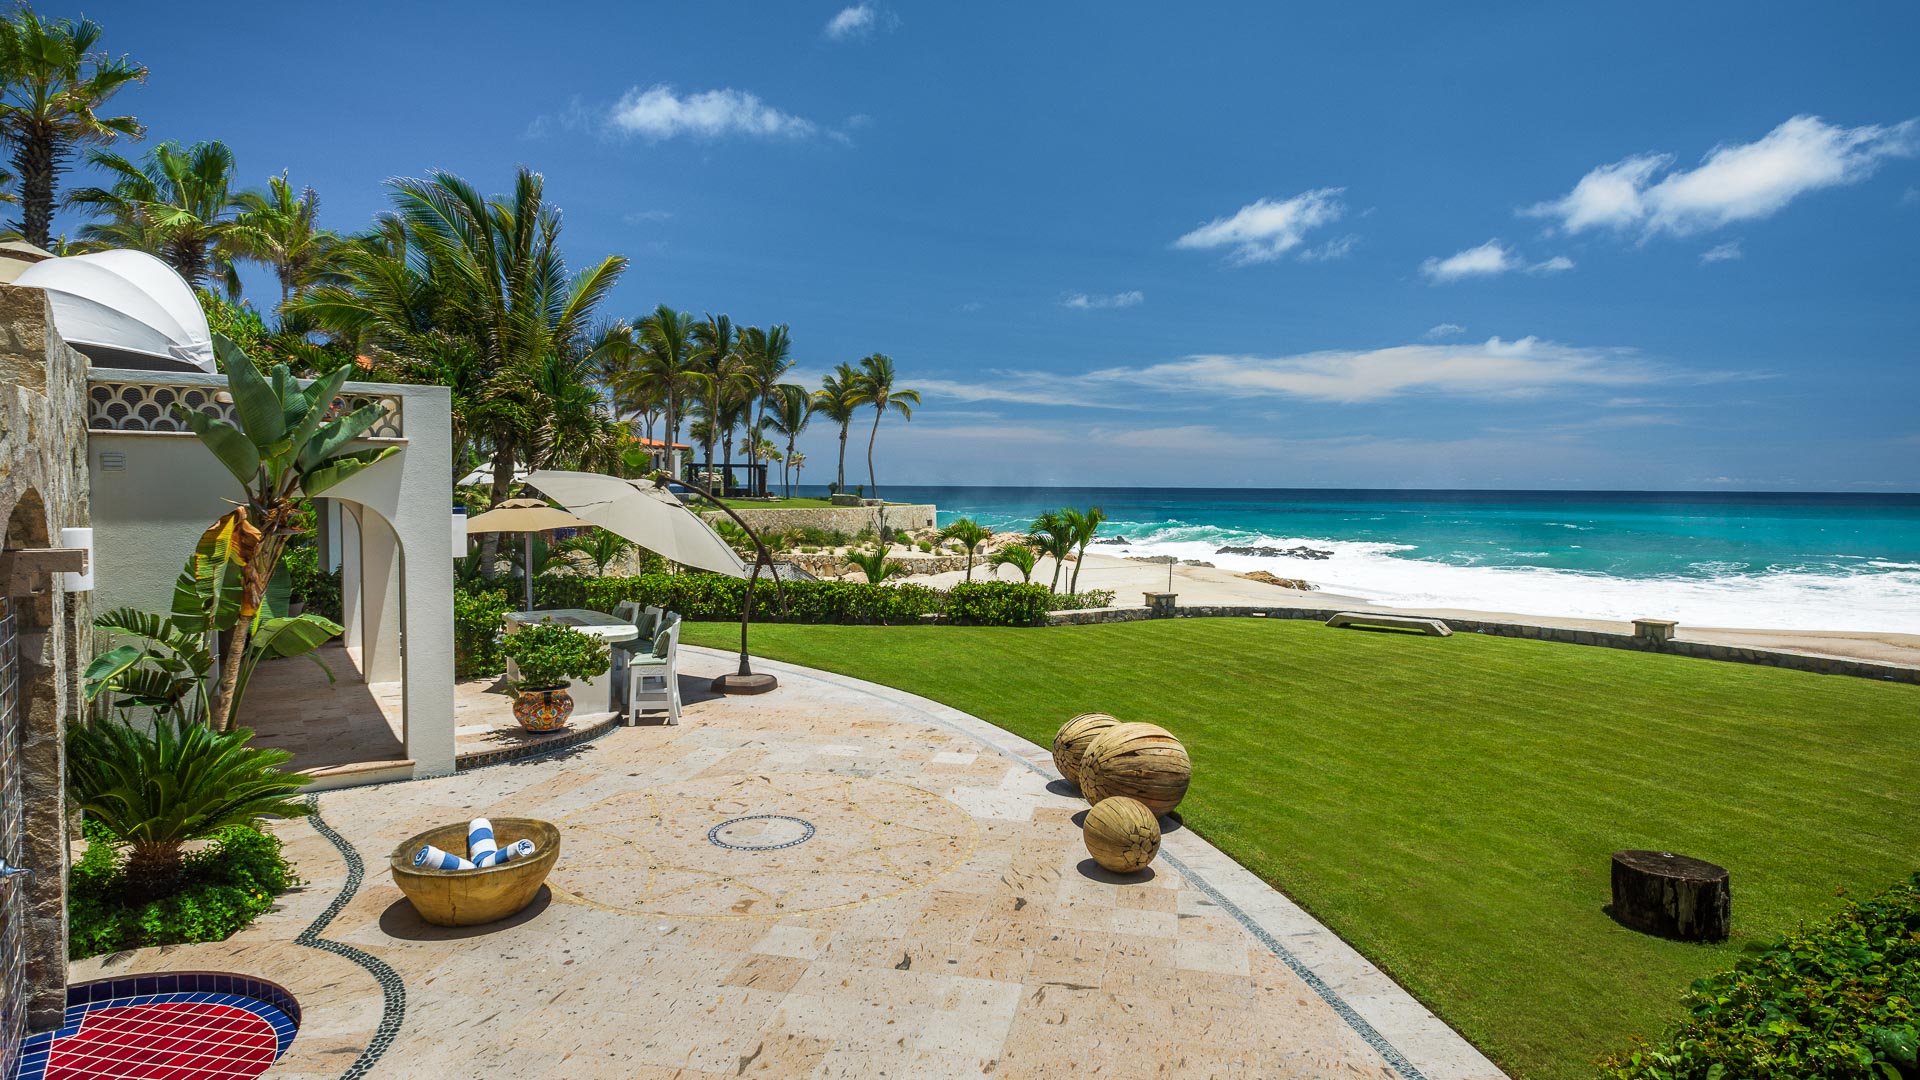 Property Image 2 - Beachfront Mansion with Yesteryear Charm for a Cabo Luxury Vacay